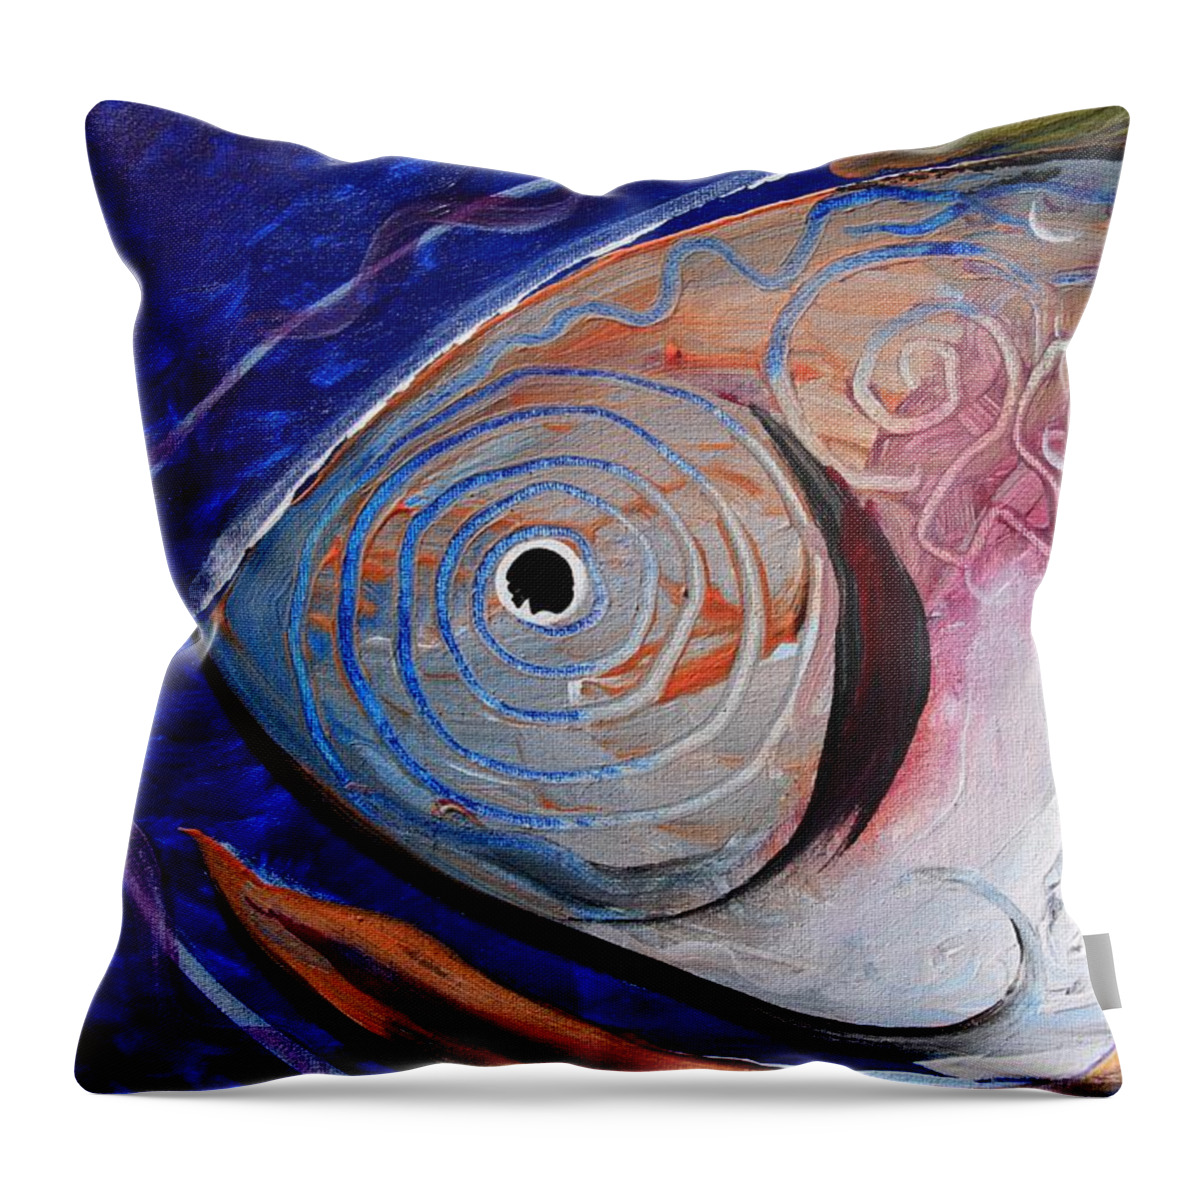 Fish Throw Pillow featuring the painting Big Fish by J Vincent Scarpace